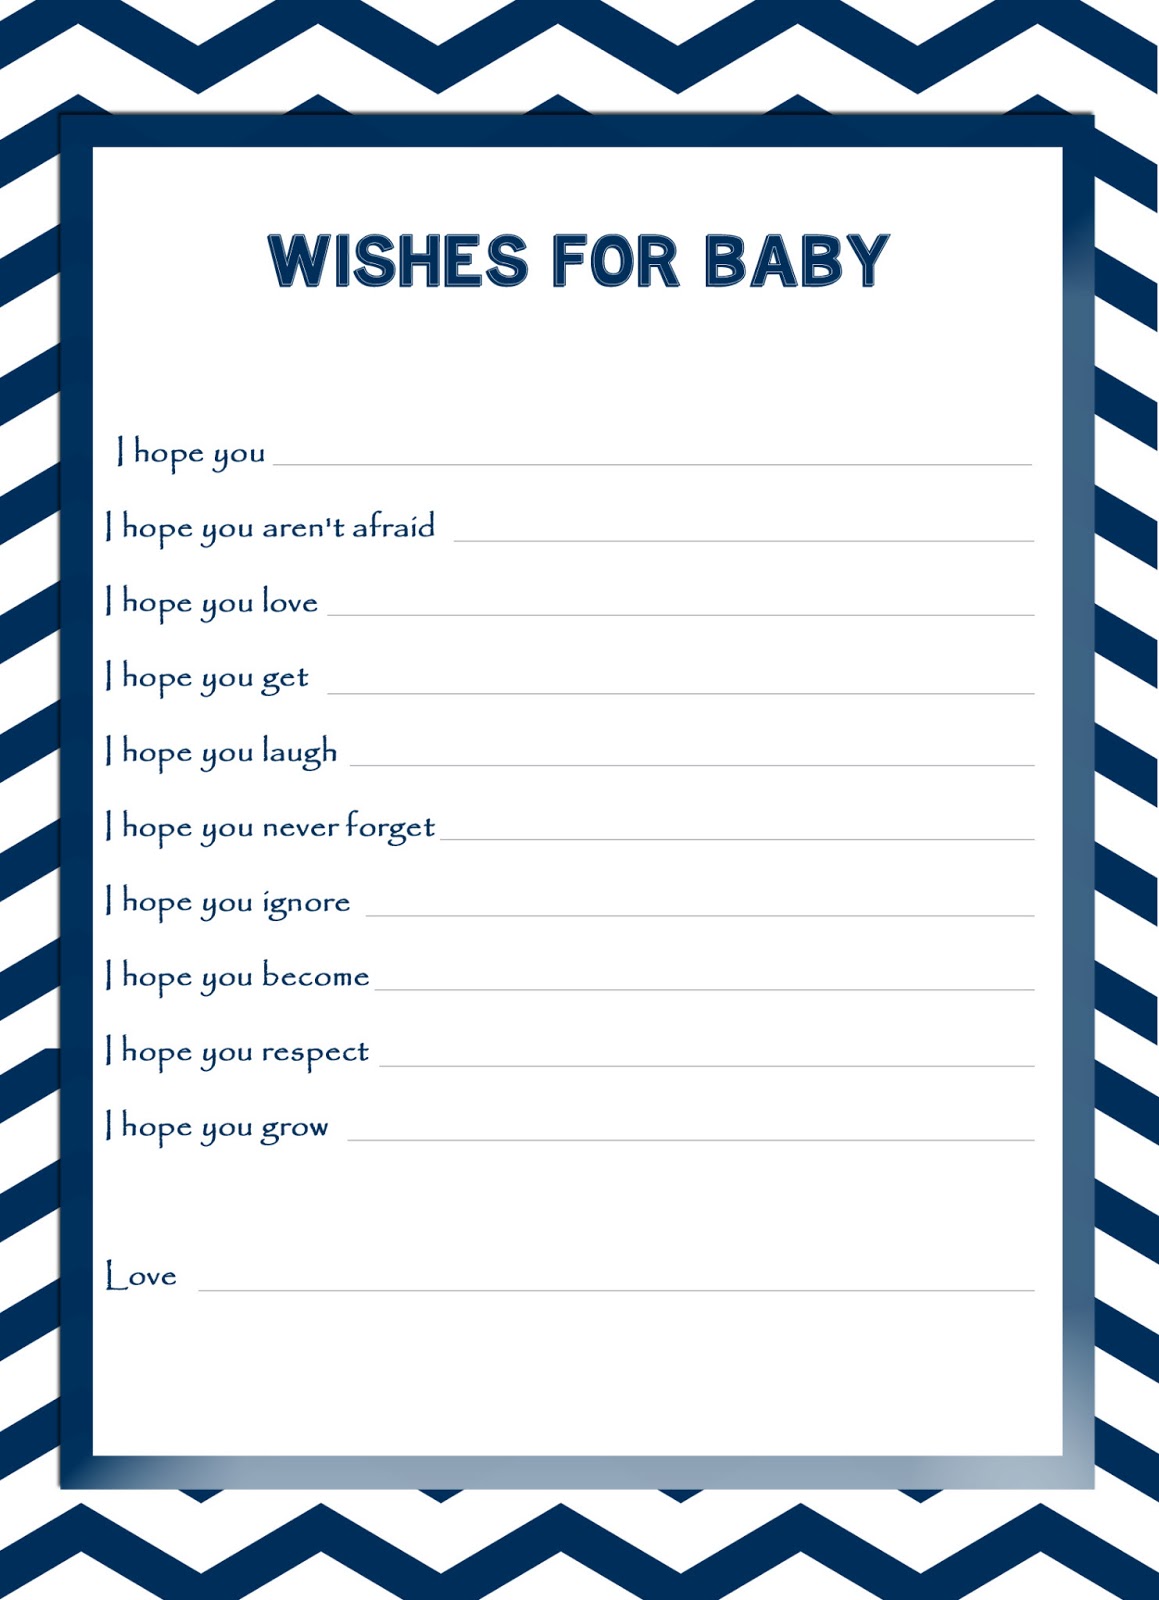 free-the-diva-freebie-of-the-week-blue-white-chevron-pattern-wishes